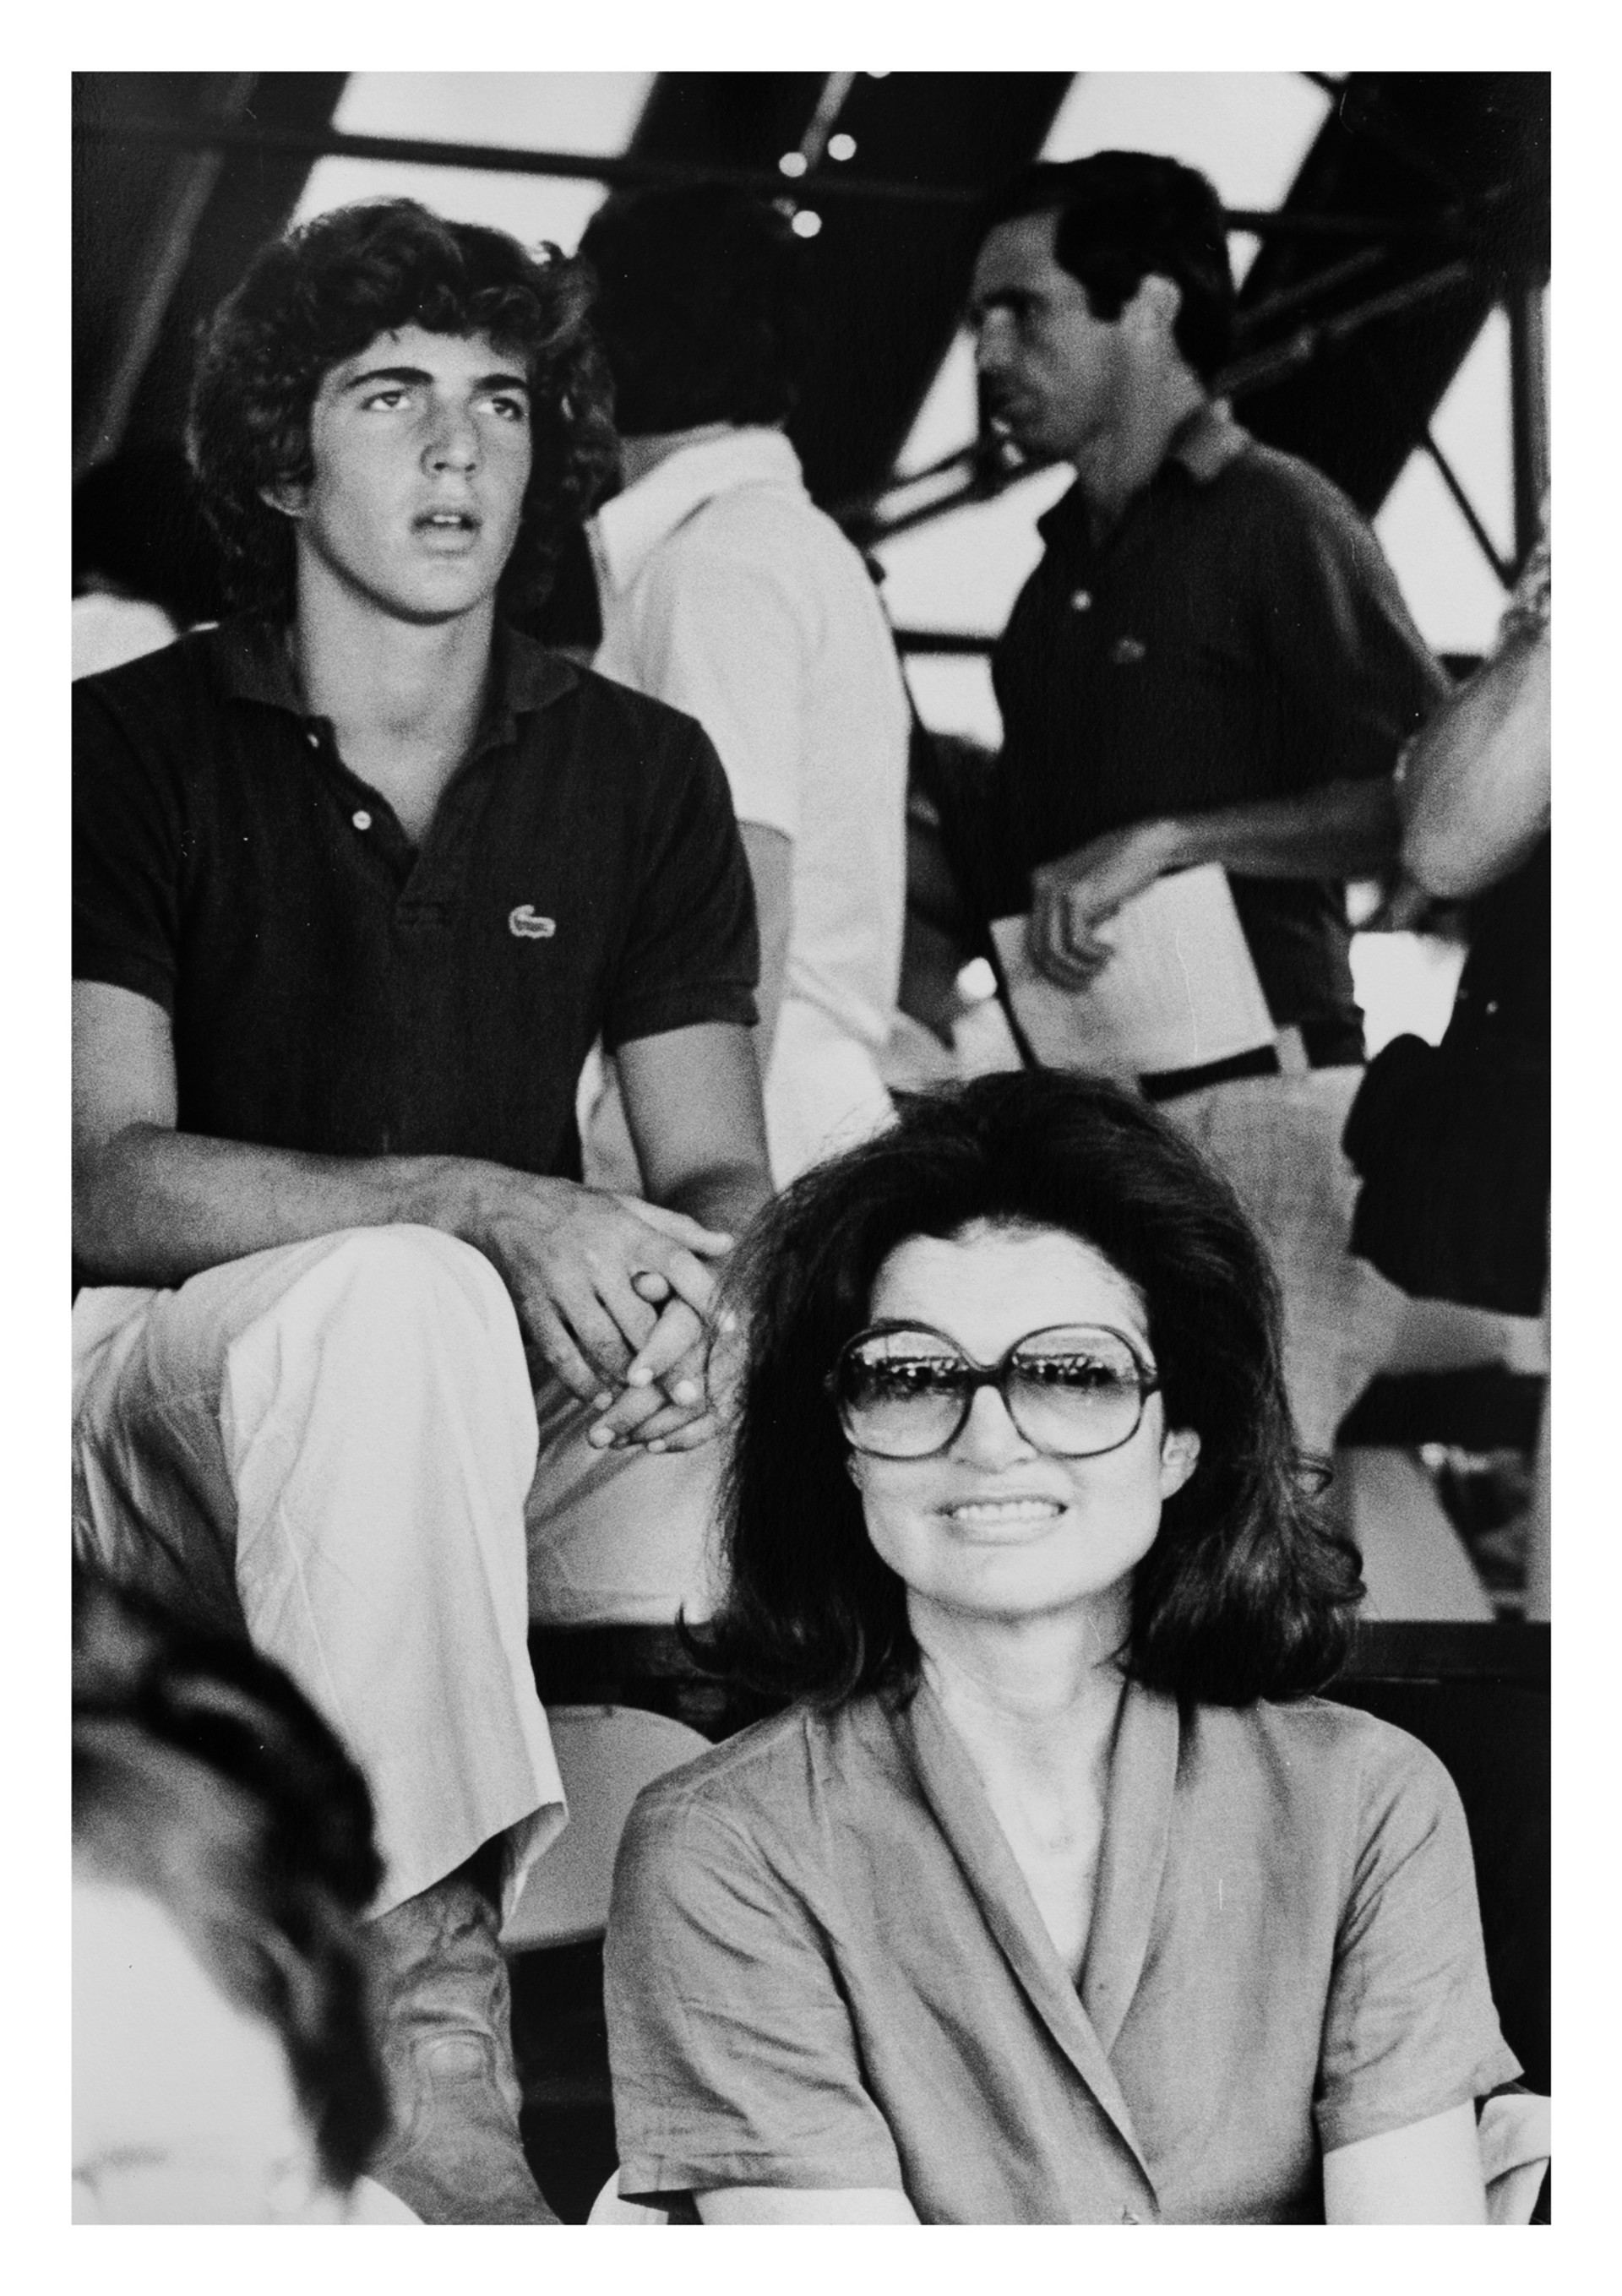 Jackie Kennedy Onassis and John F. Kennedy, Jr. by Ron Galella